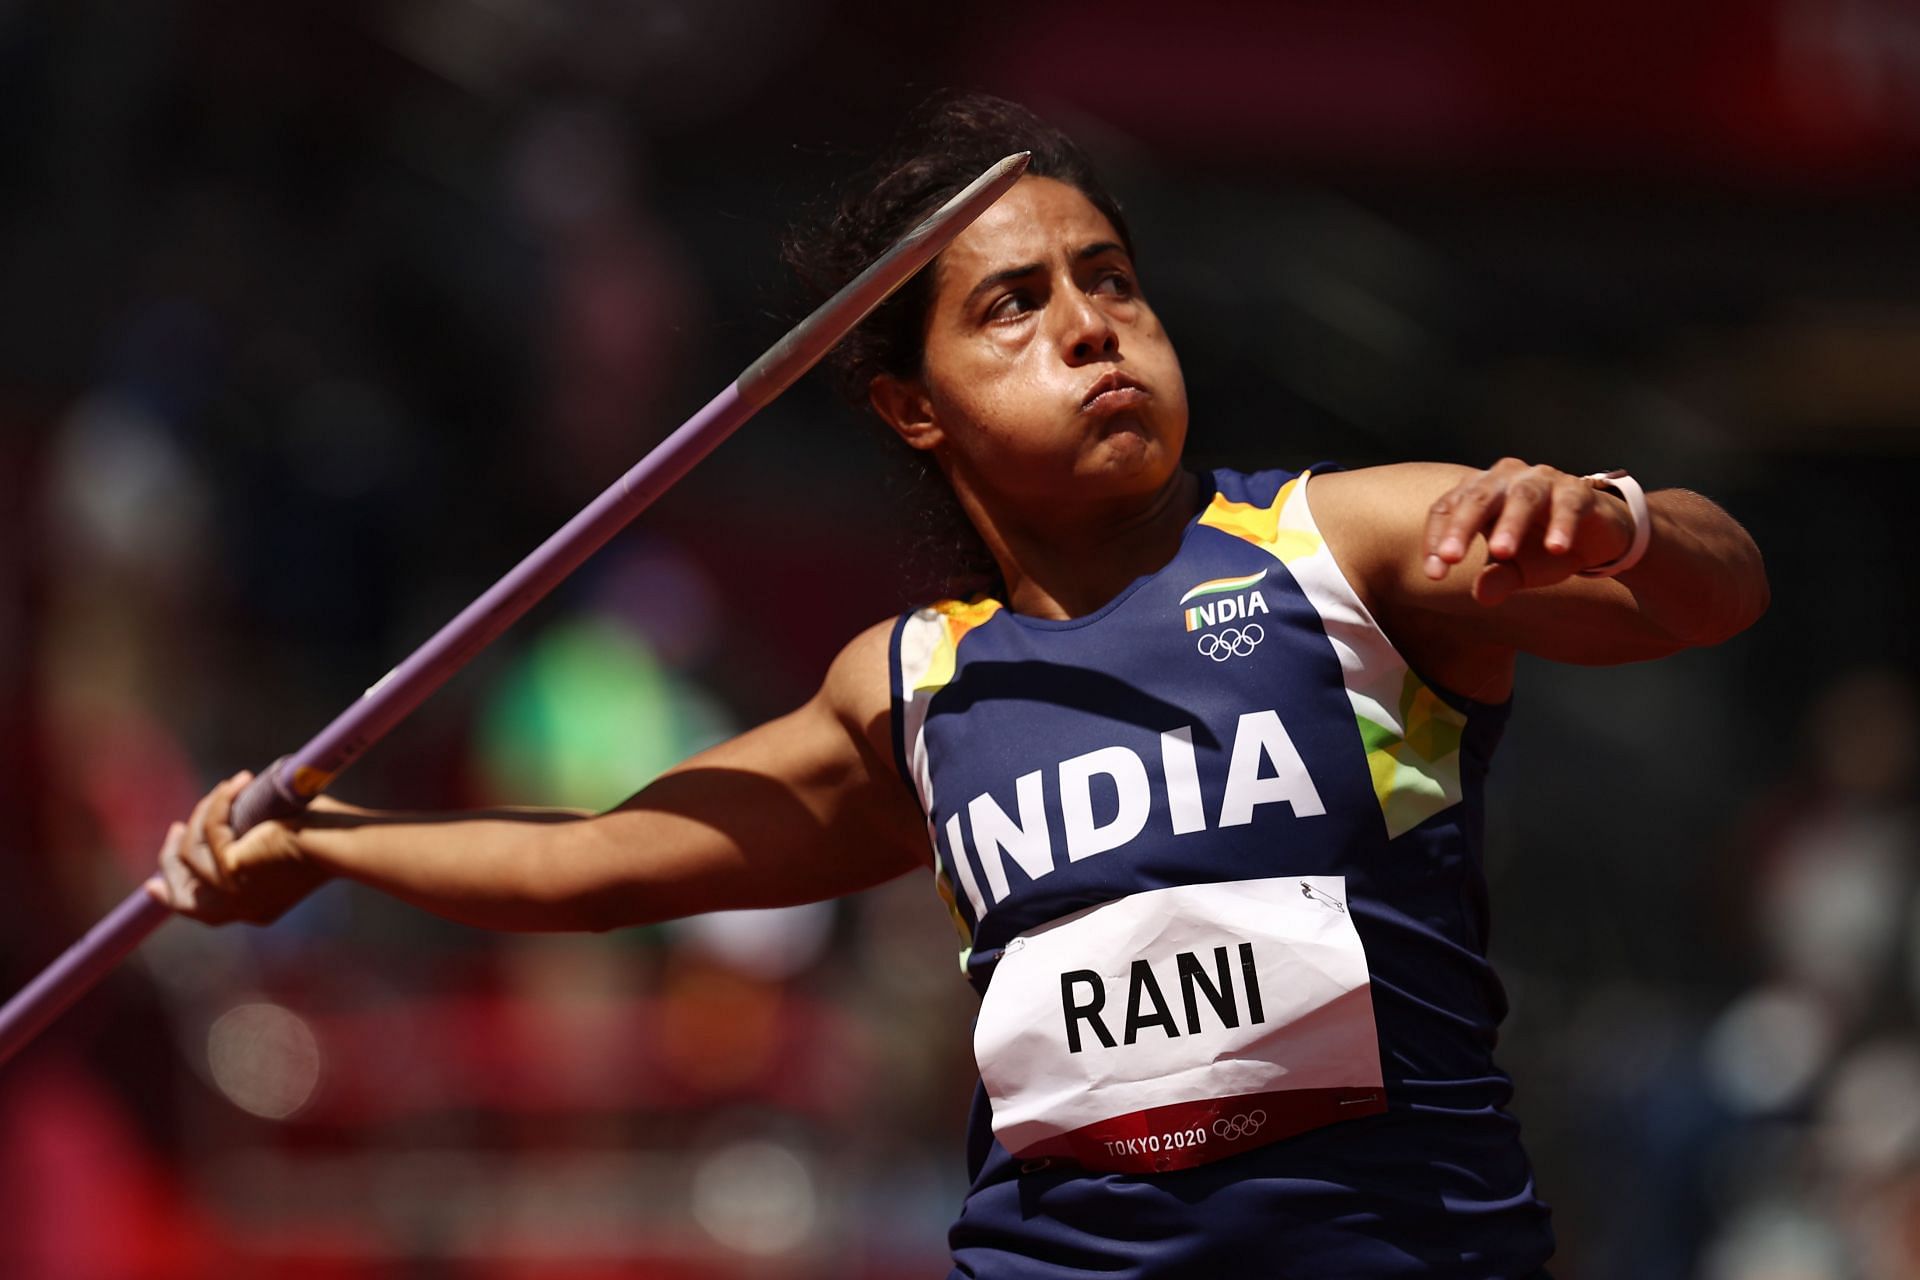 Indian athlete Annu Rani at the Tokyo Olympics. (PC: Getty Images)